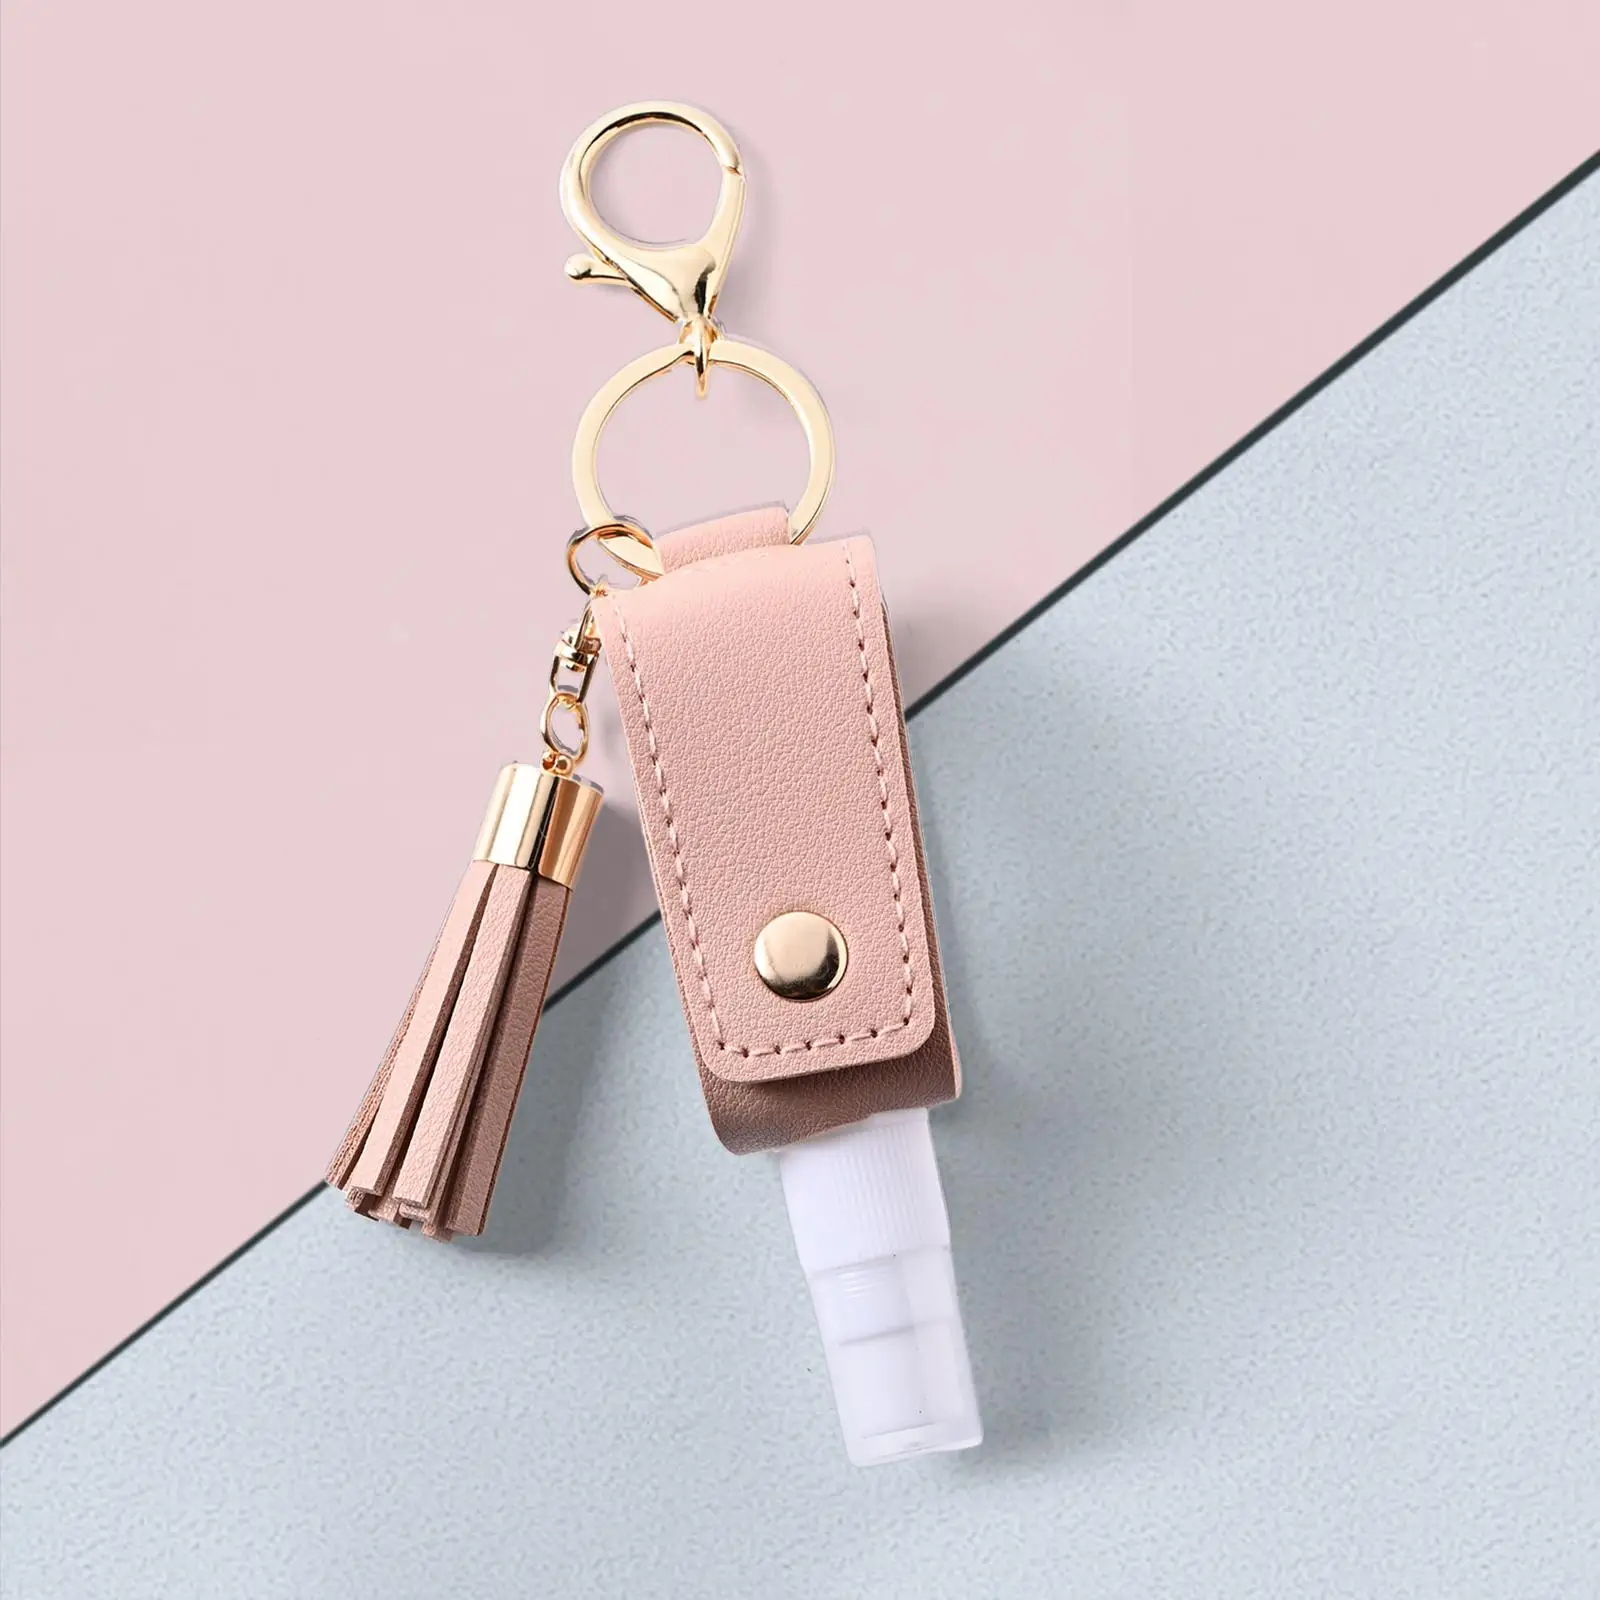 30ml Hand Washing Holder Keychain Refillable Spray Bottle Reusable Portable Empty Bottle for Conditioner Liquid Washing Gel Baby